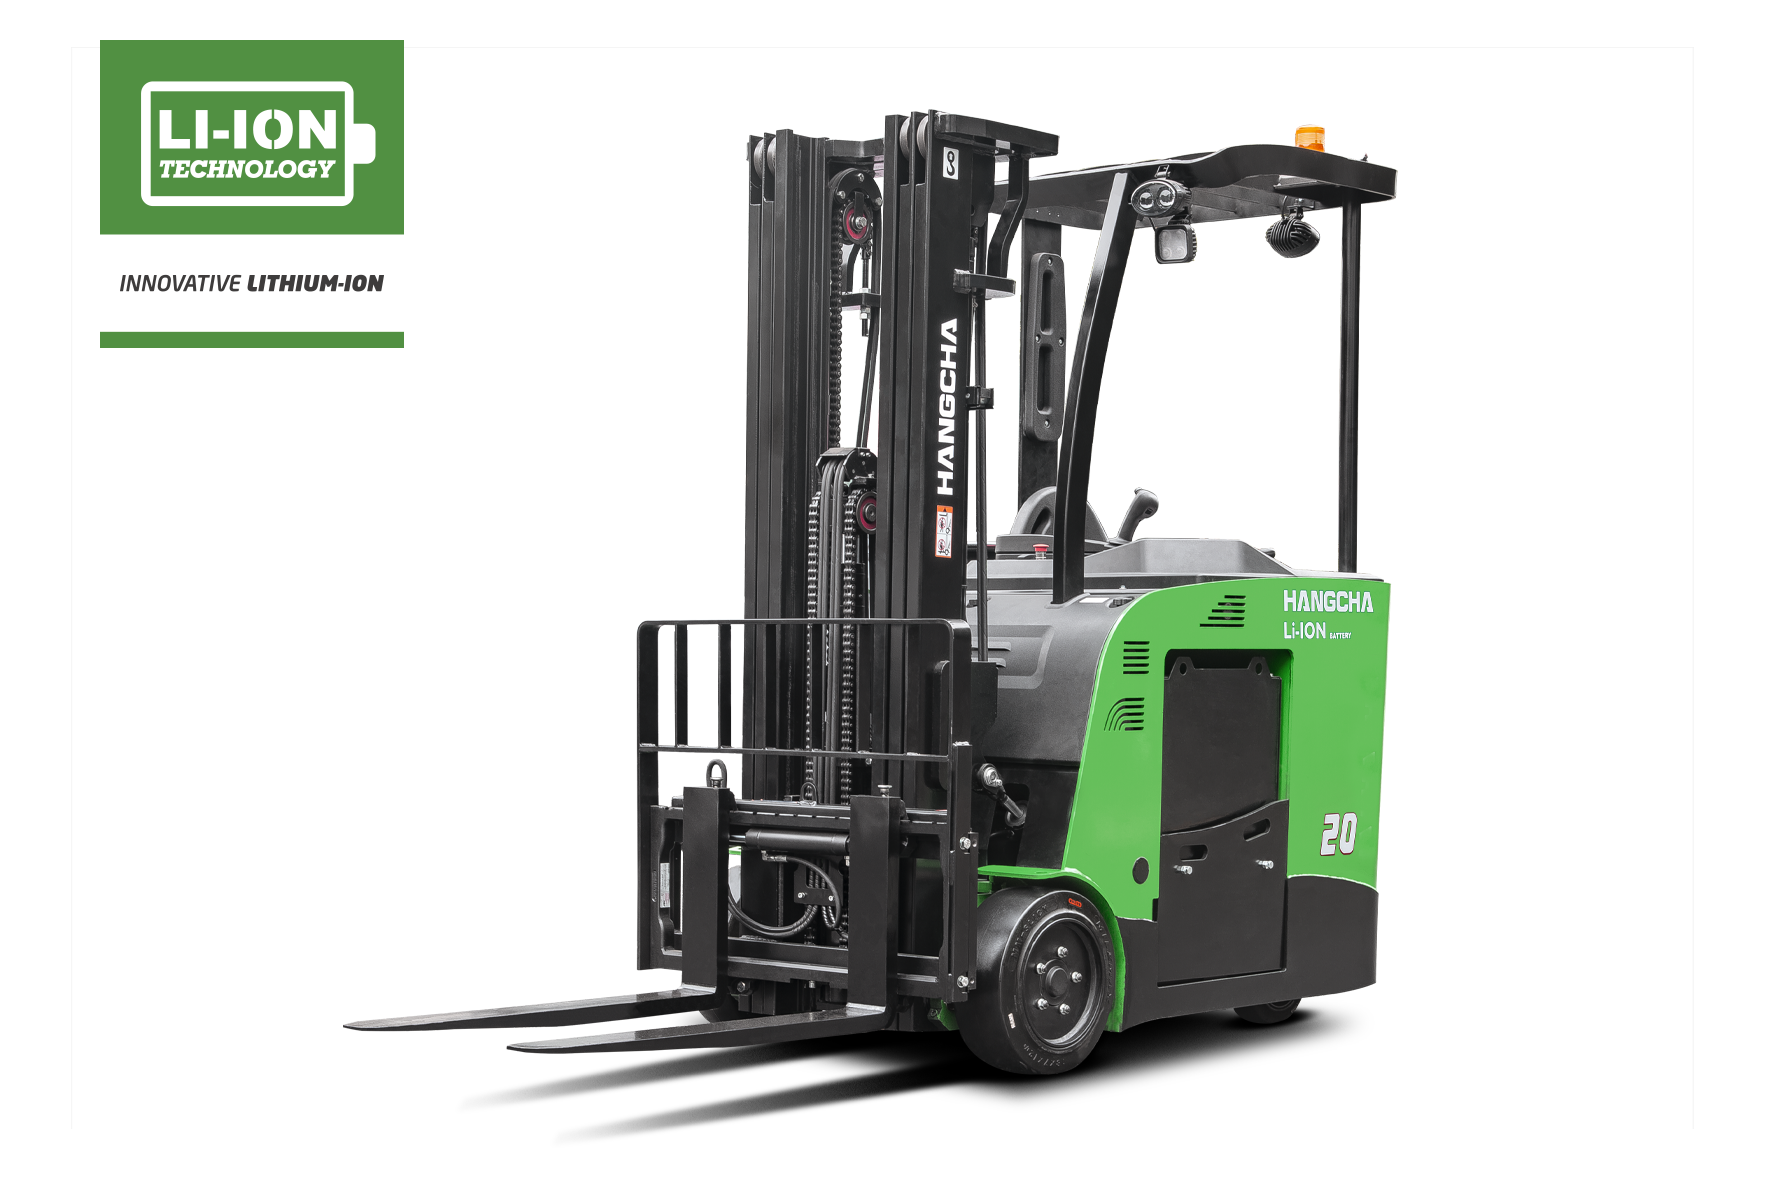 3 Wheel Electric Lithium-ion Stand-Up Counterbalanced Forklift 3,000-5,000lbs